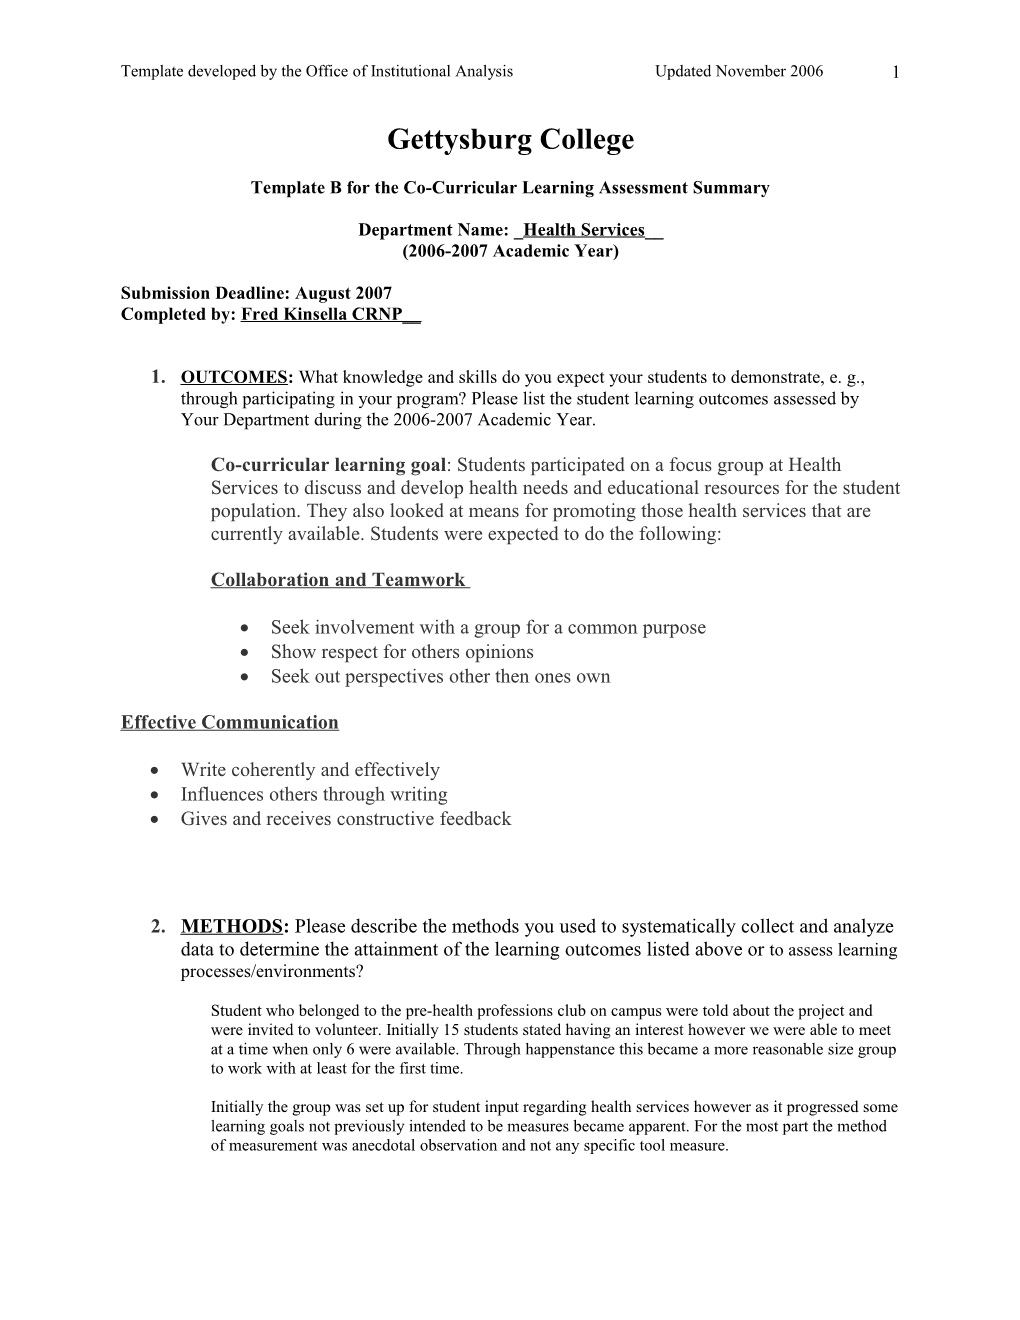 Template B for the Co-Curricular Learning Assessment Summary